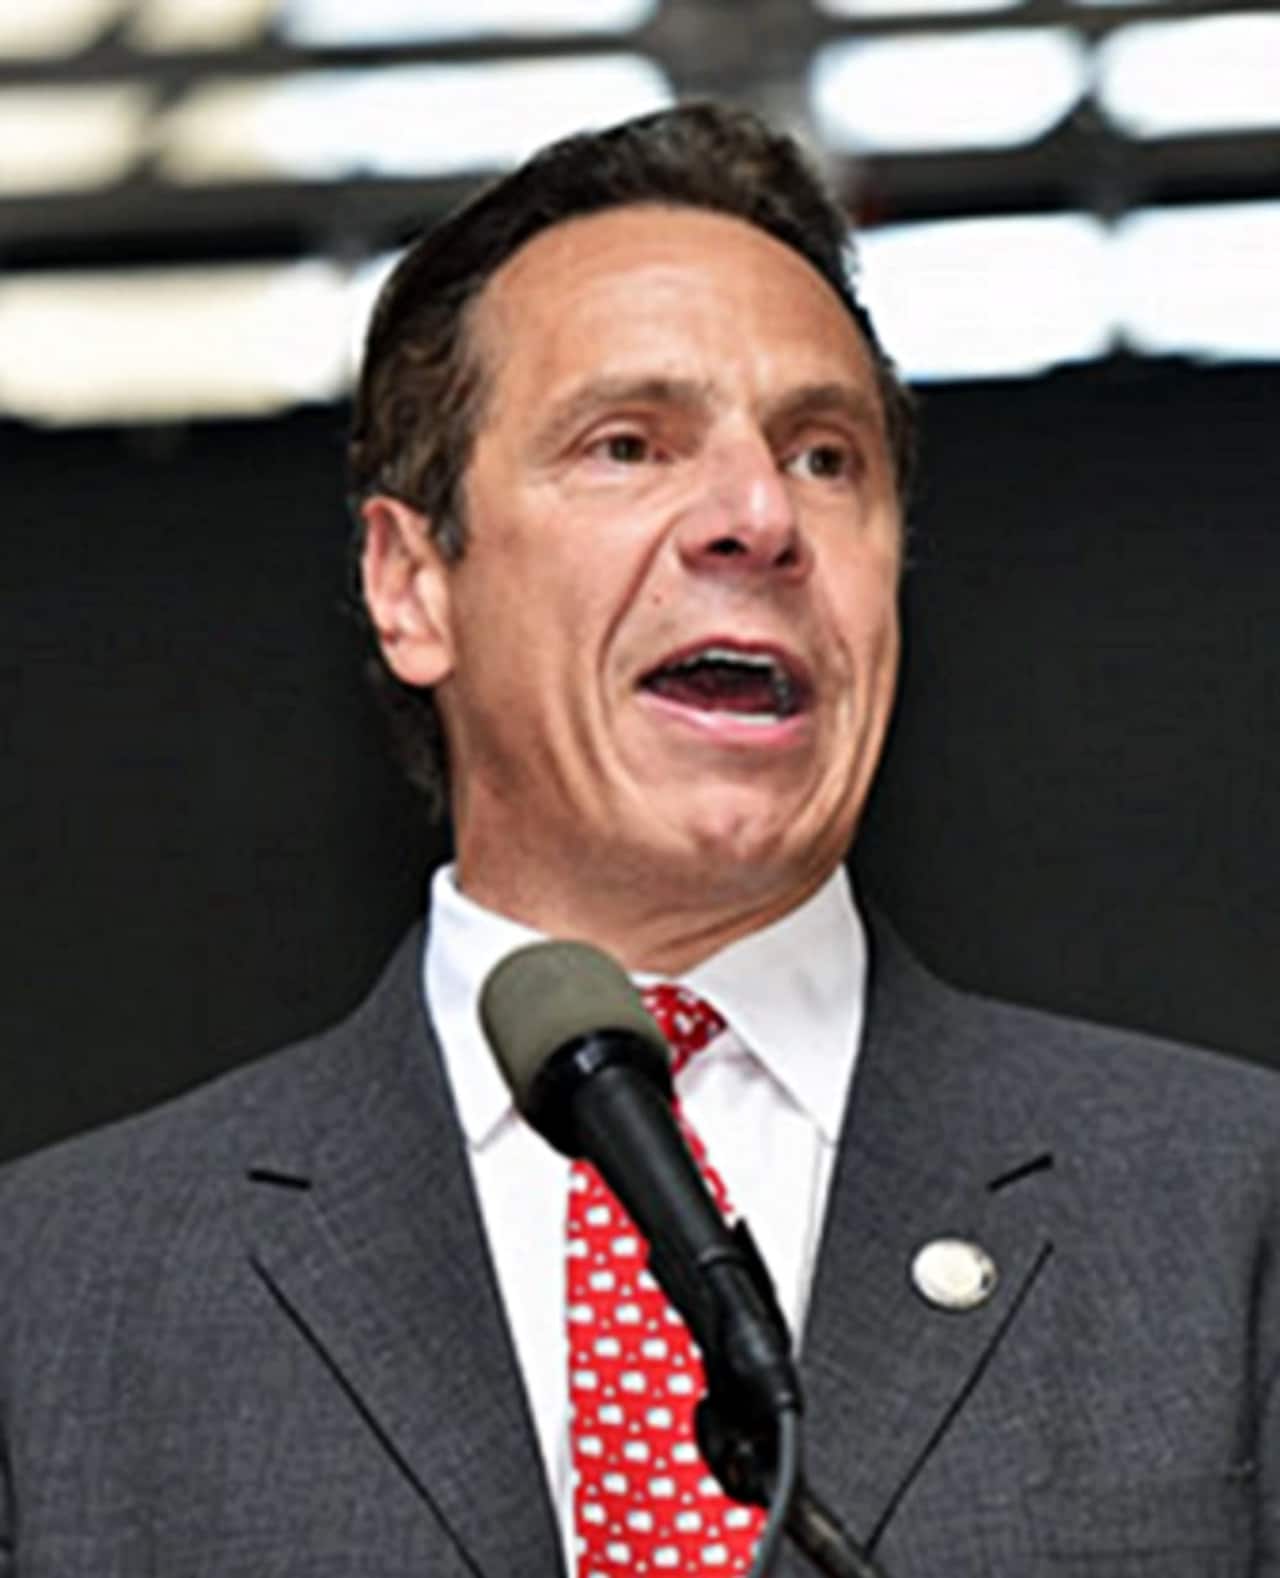 Gov. Andrew Cuomo signed announced Tuesday that the state will spend $55 million in an effort to draw tourism across the state.